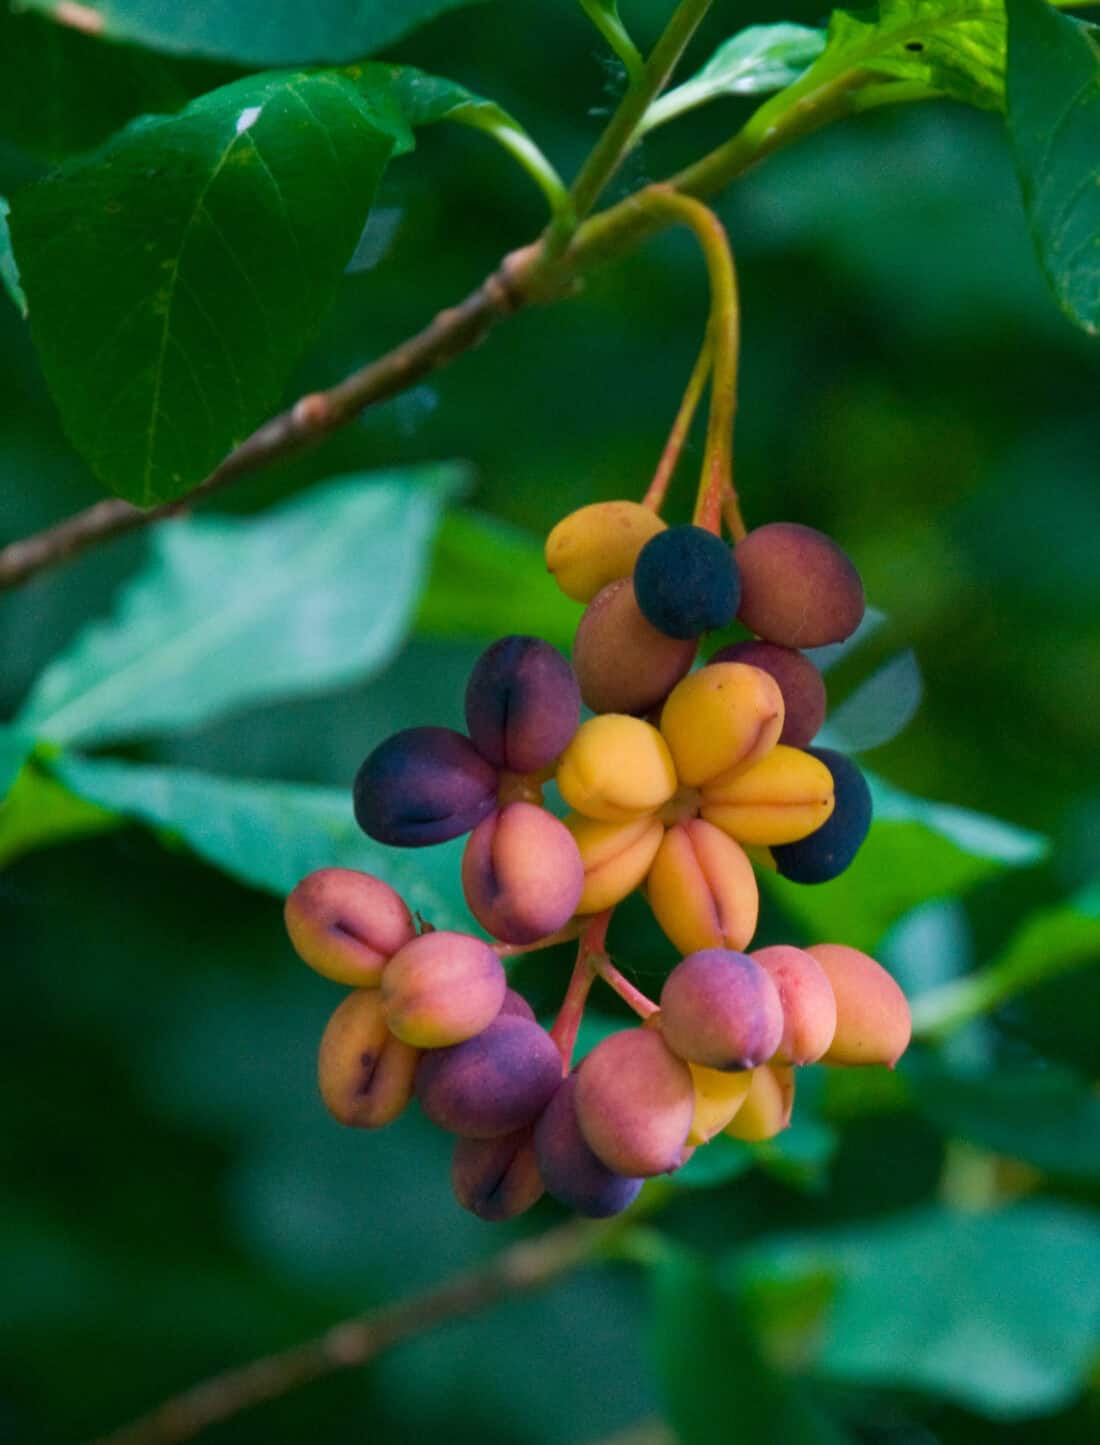 A cluster of multicolored berries in shades of purple, pink, and yellow hanging from a branch of Oemleria cerasiformis, surrounded by green leaves.